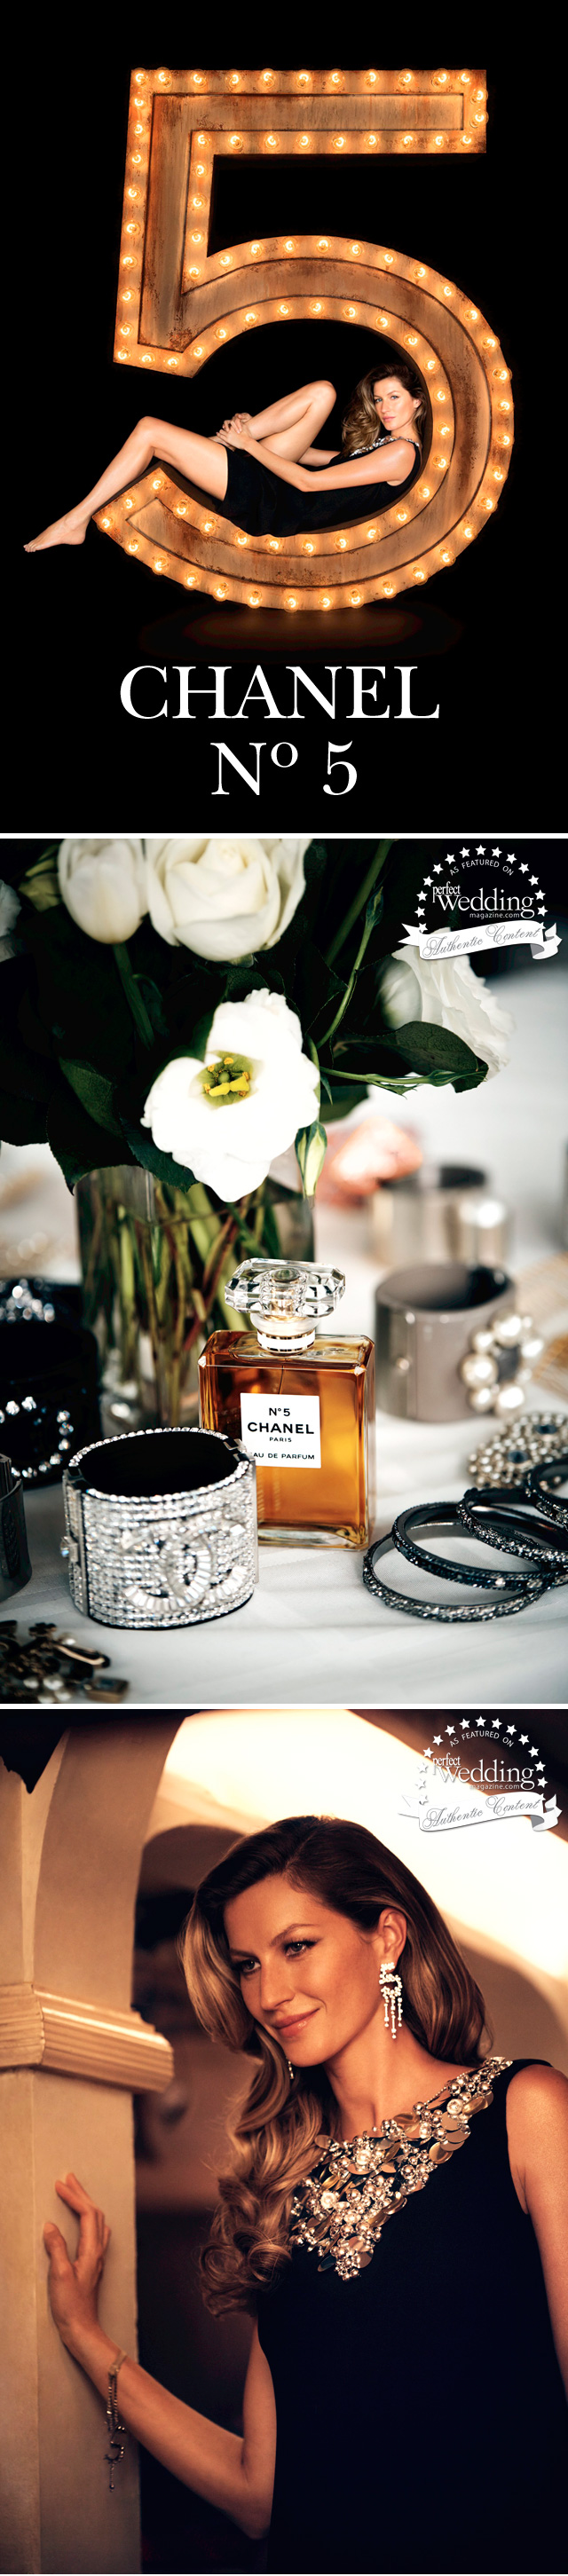 Chanel, Chanel No. 5, The One That I Want, Perfect Wedding Magazine, Gisele Bündchen